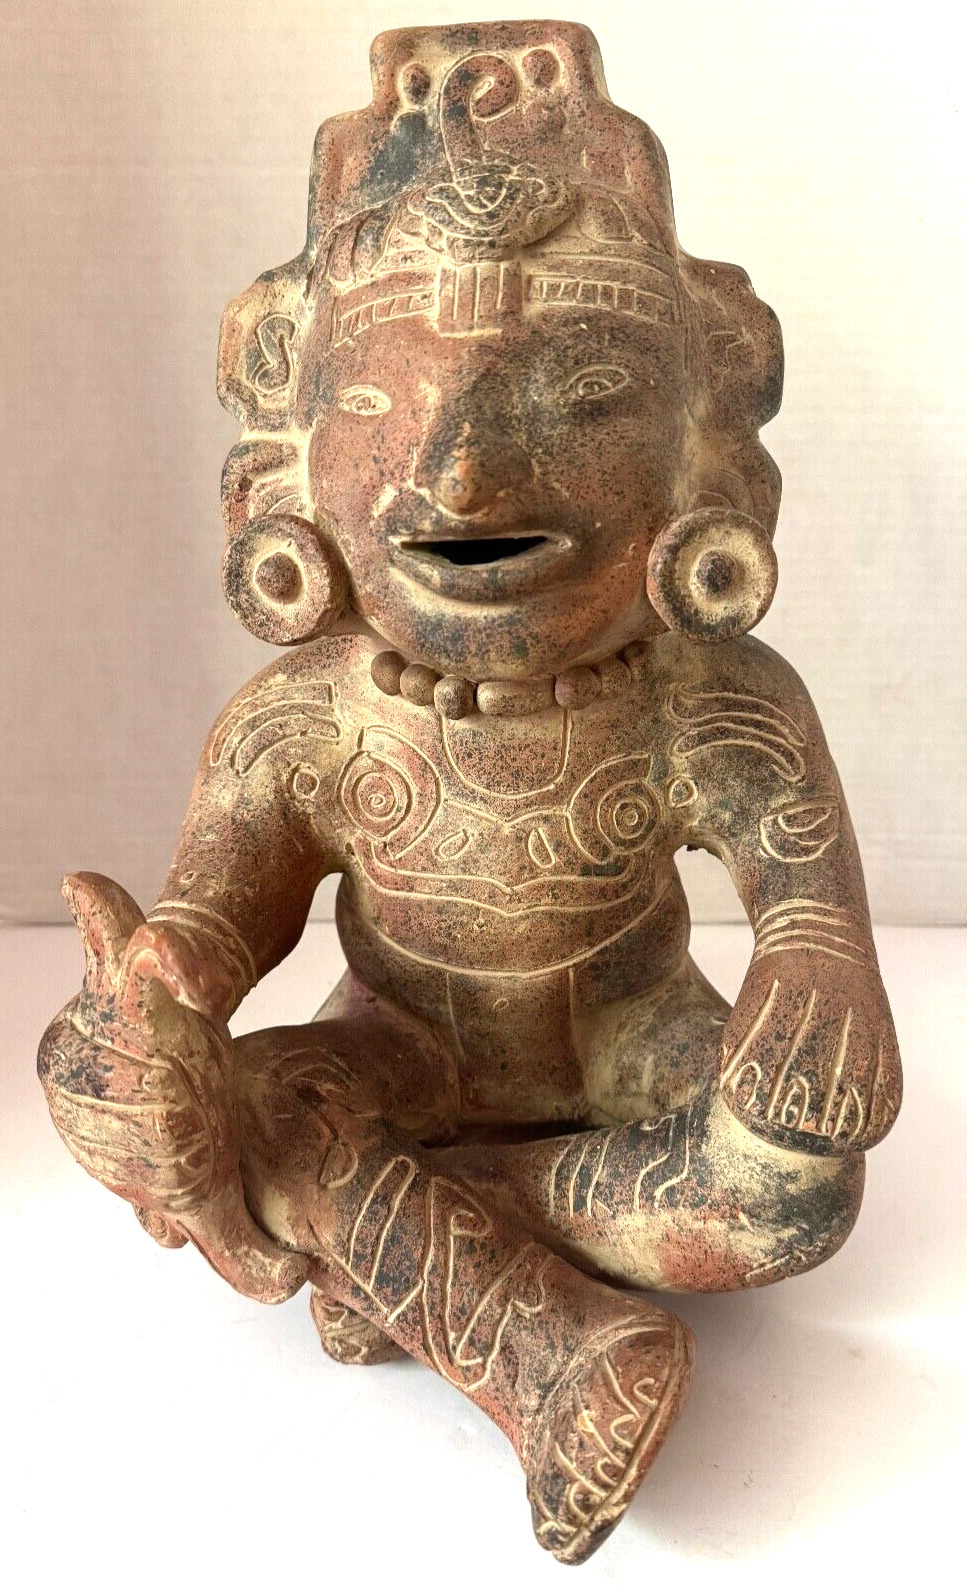 Mayan Aztec Terracotta Clay 13 in Statue Sitting Tribal God-like Figure Mexico